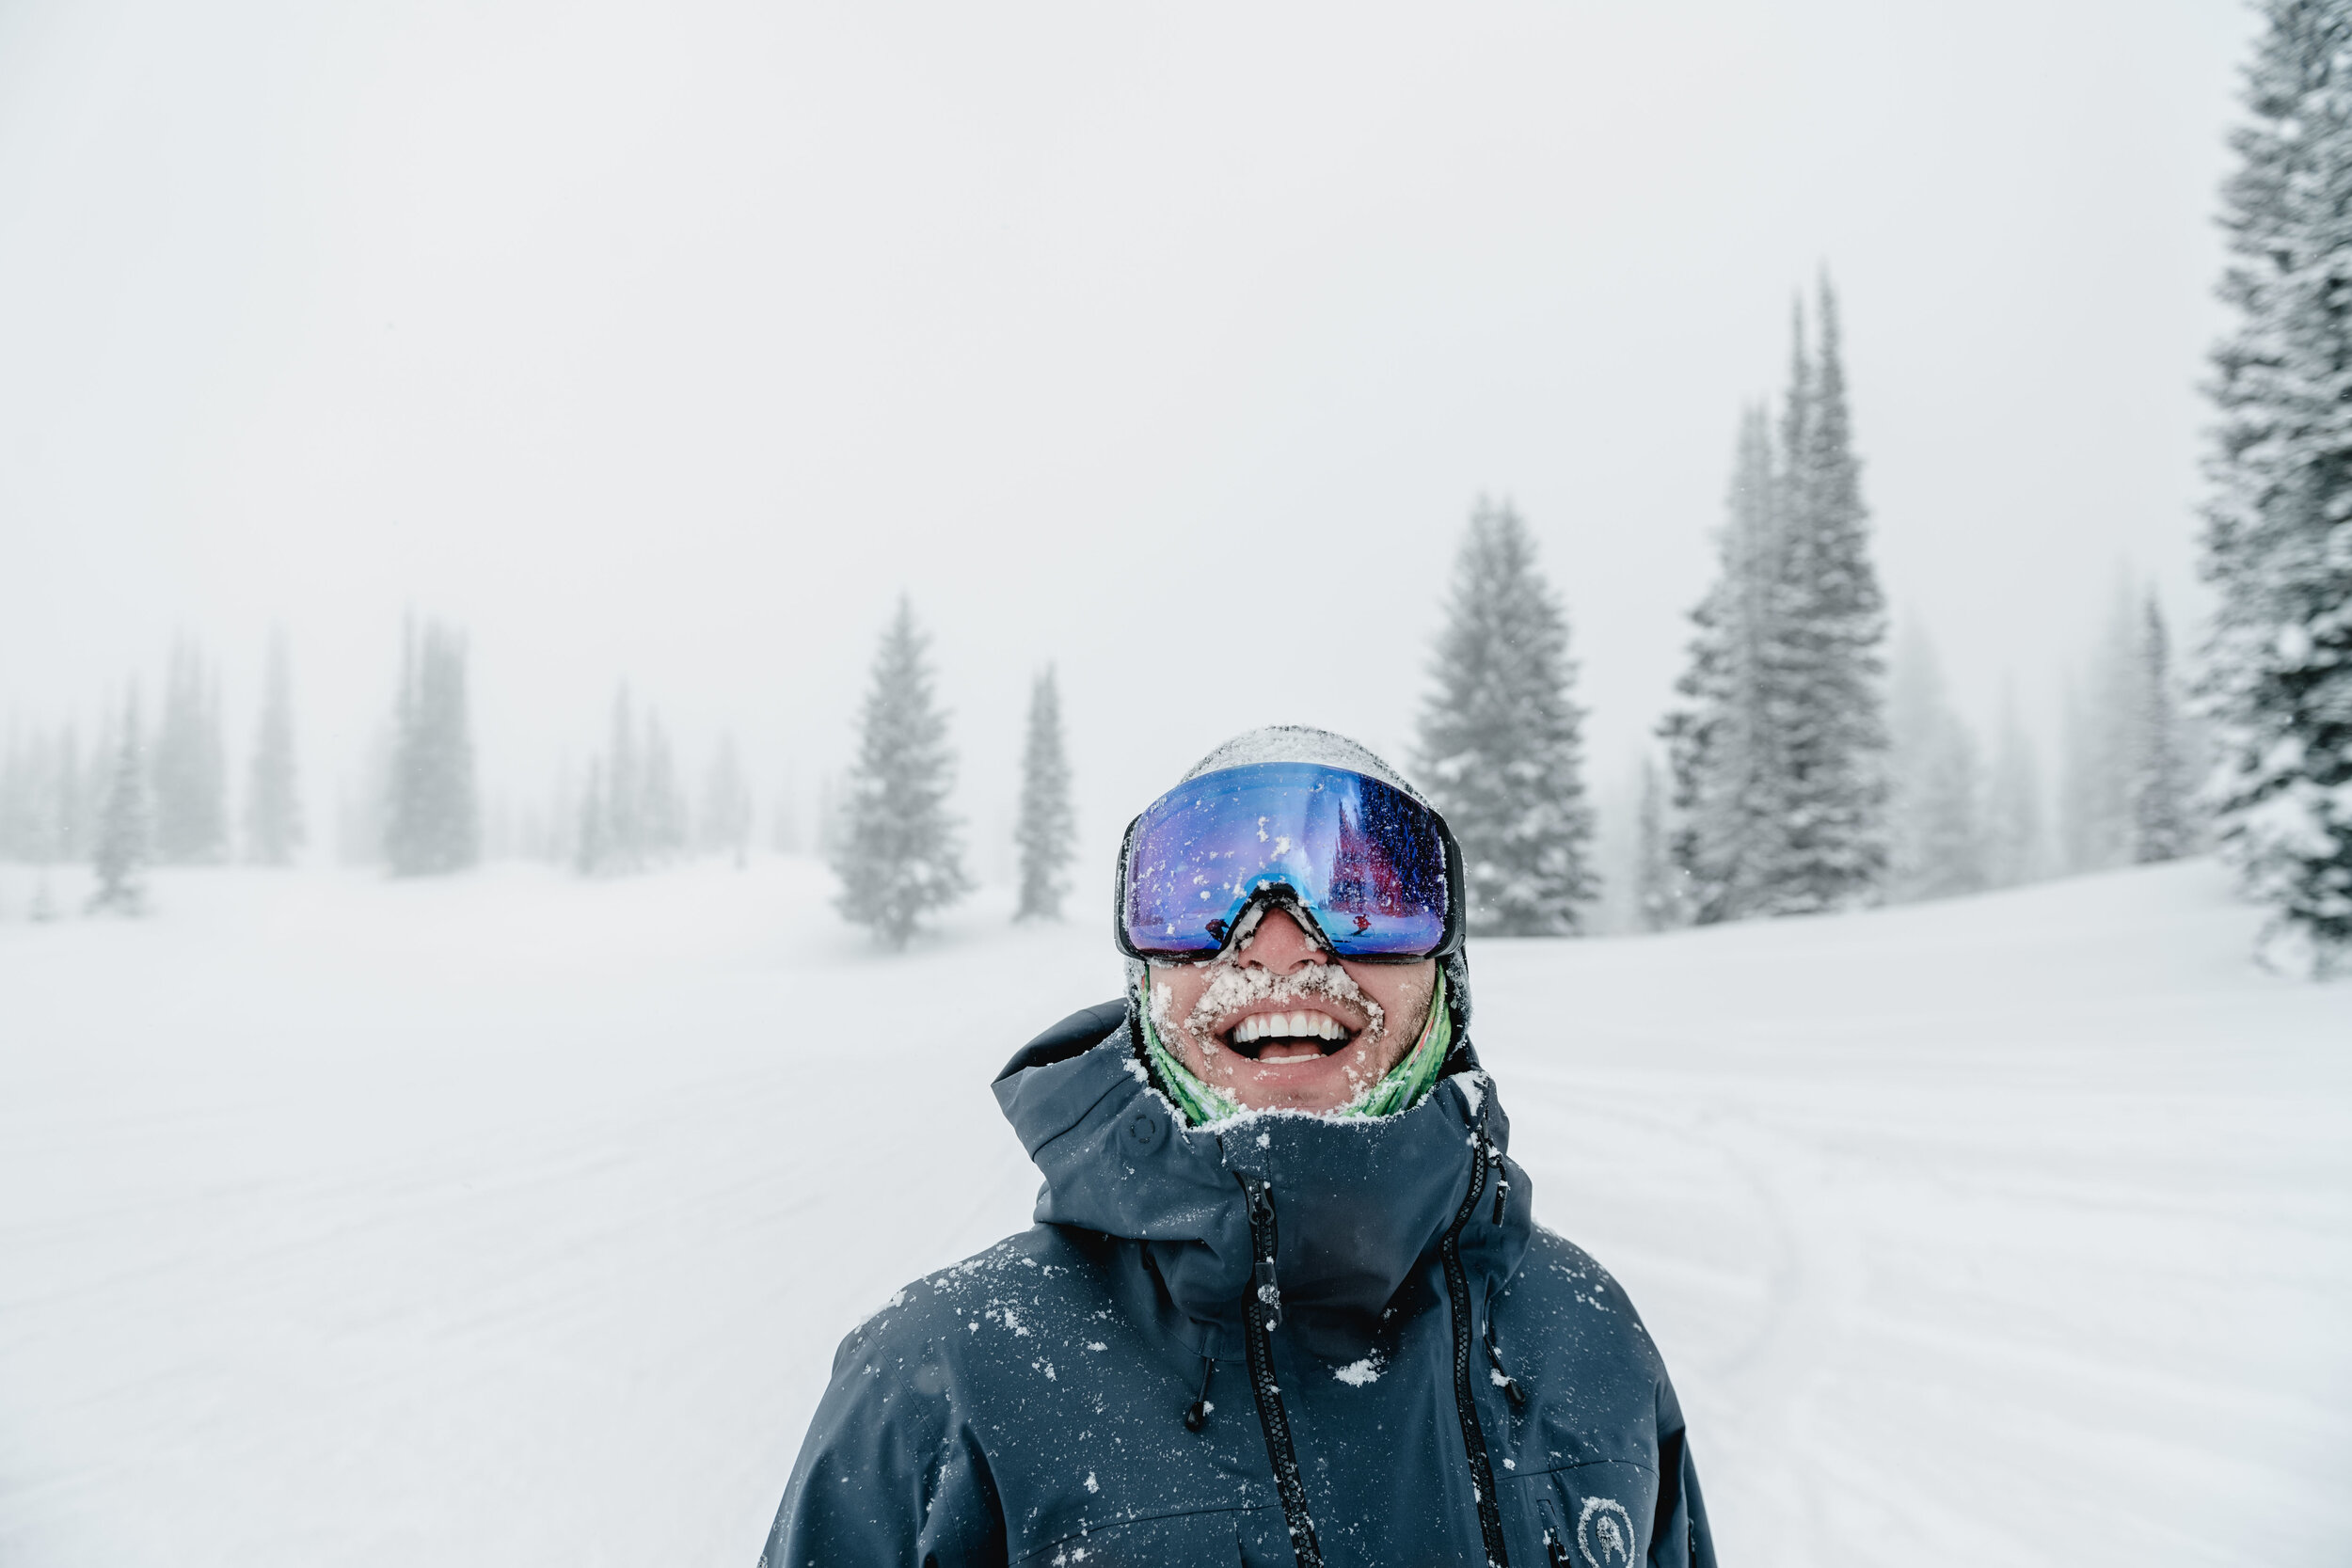   Backcountry Gear &amp; Apparel Winter ’19     Pursuits : Helicopter Skiing, Backcountry Skiing, and Resort Skiing   Location : Little Cottonwood Canyon, UT    Producer : Tyler Arrivillaga   Photographers : Re Wikstrom &amp; Ben Christensen 